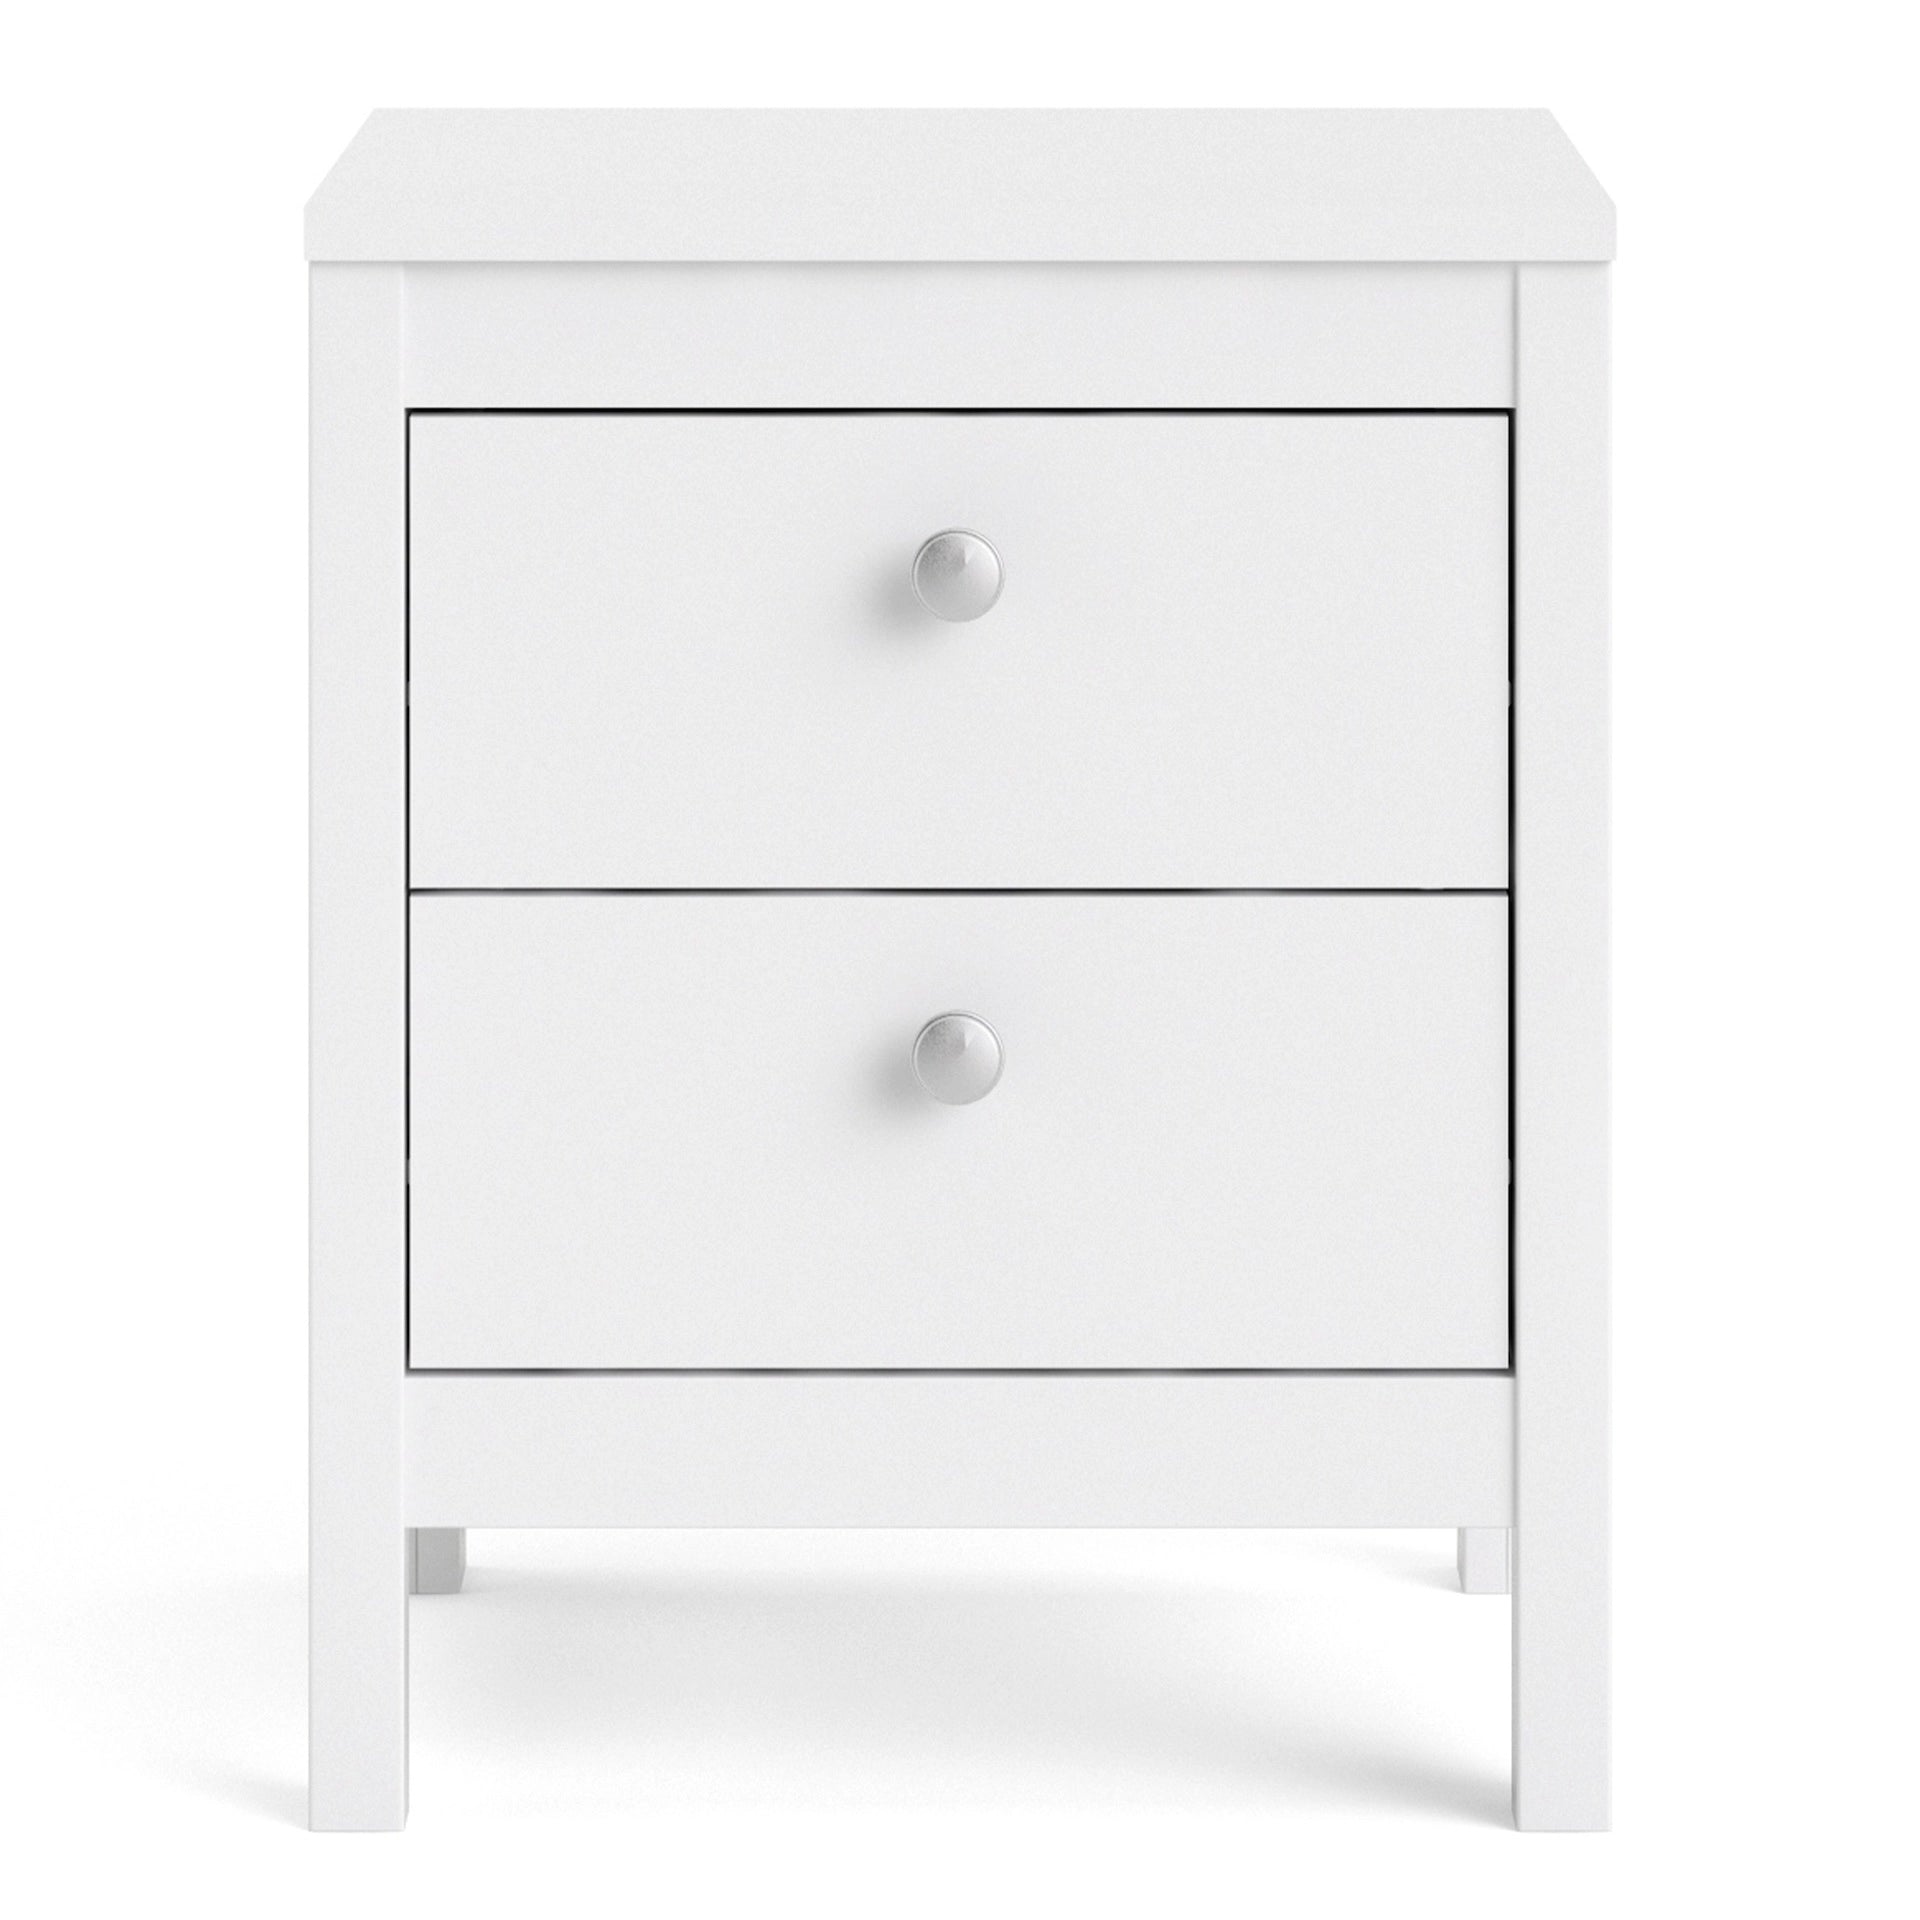 Furniture To Go Madrid Bedside Table 2 Drawers in White